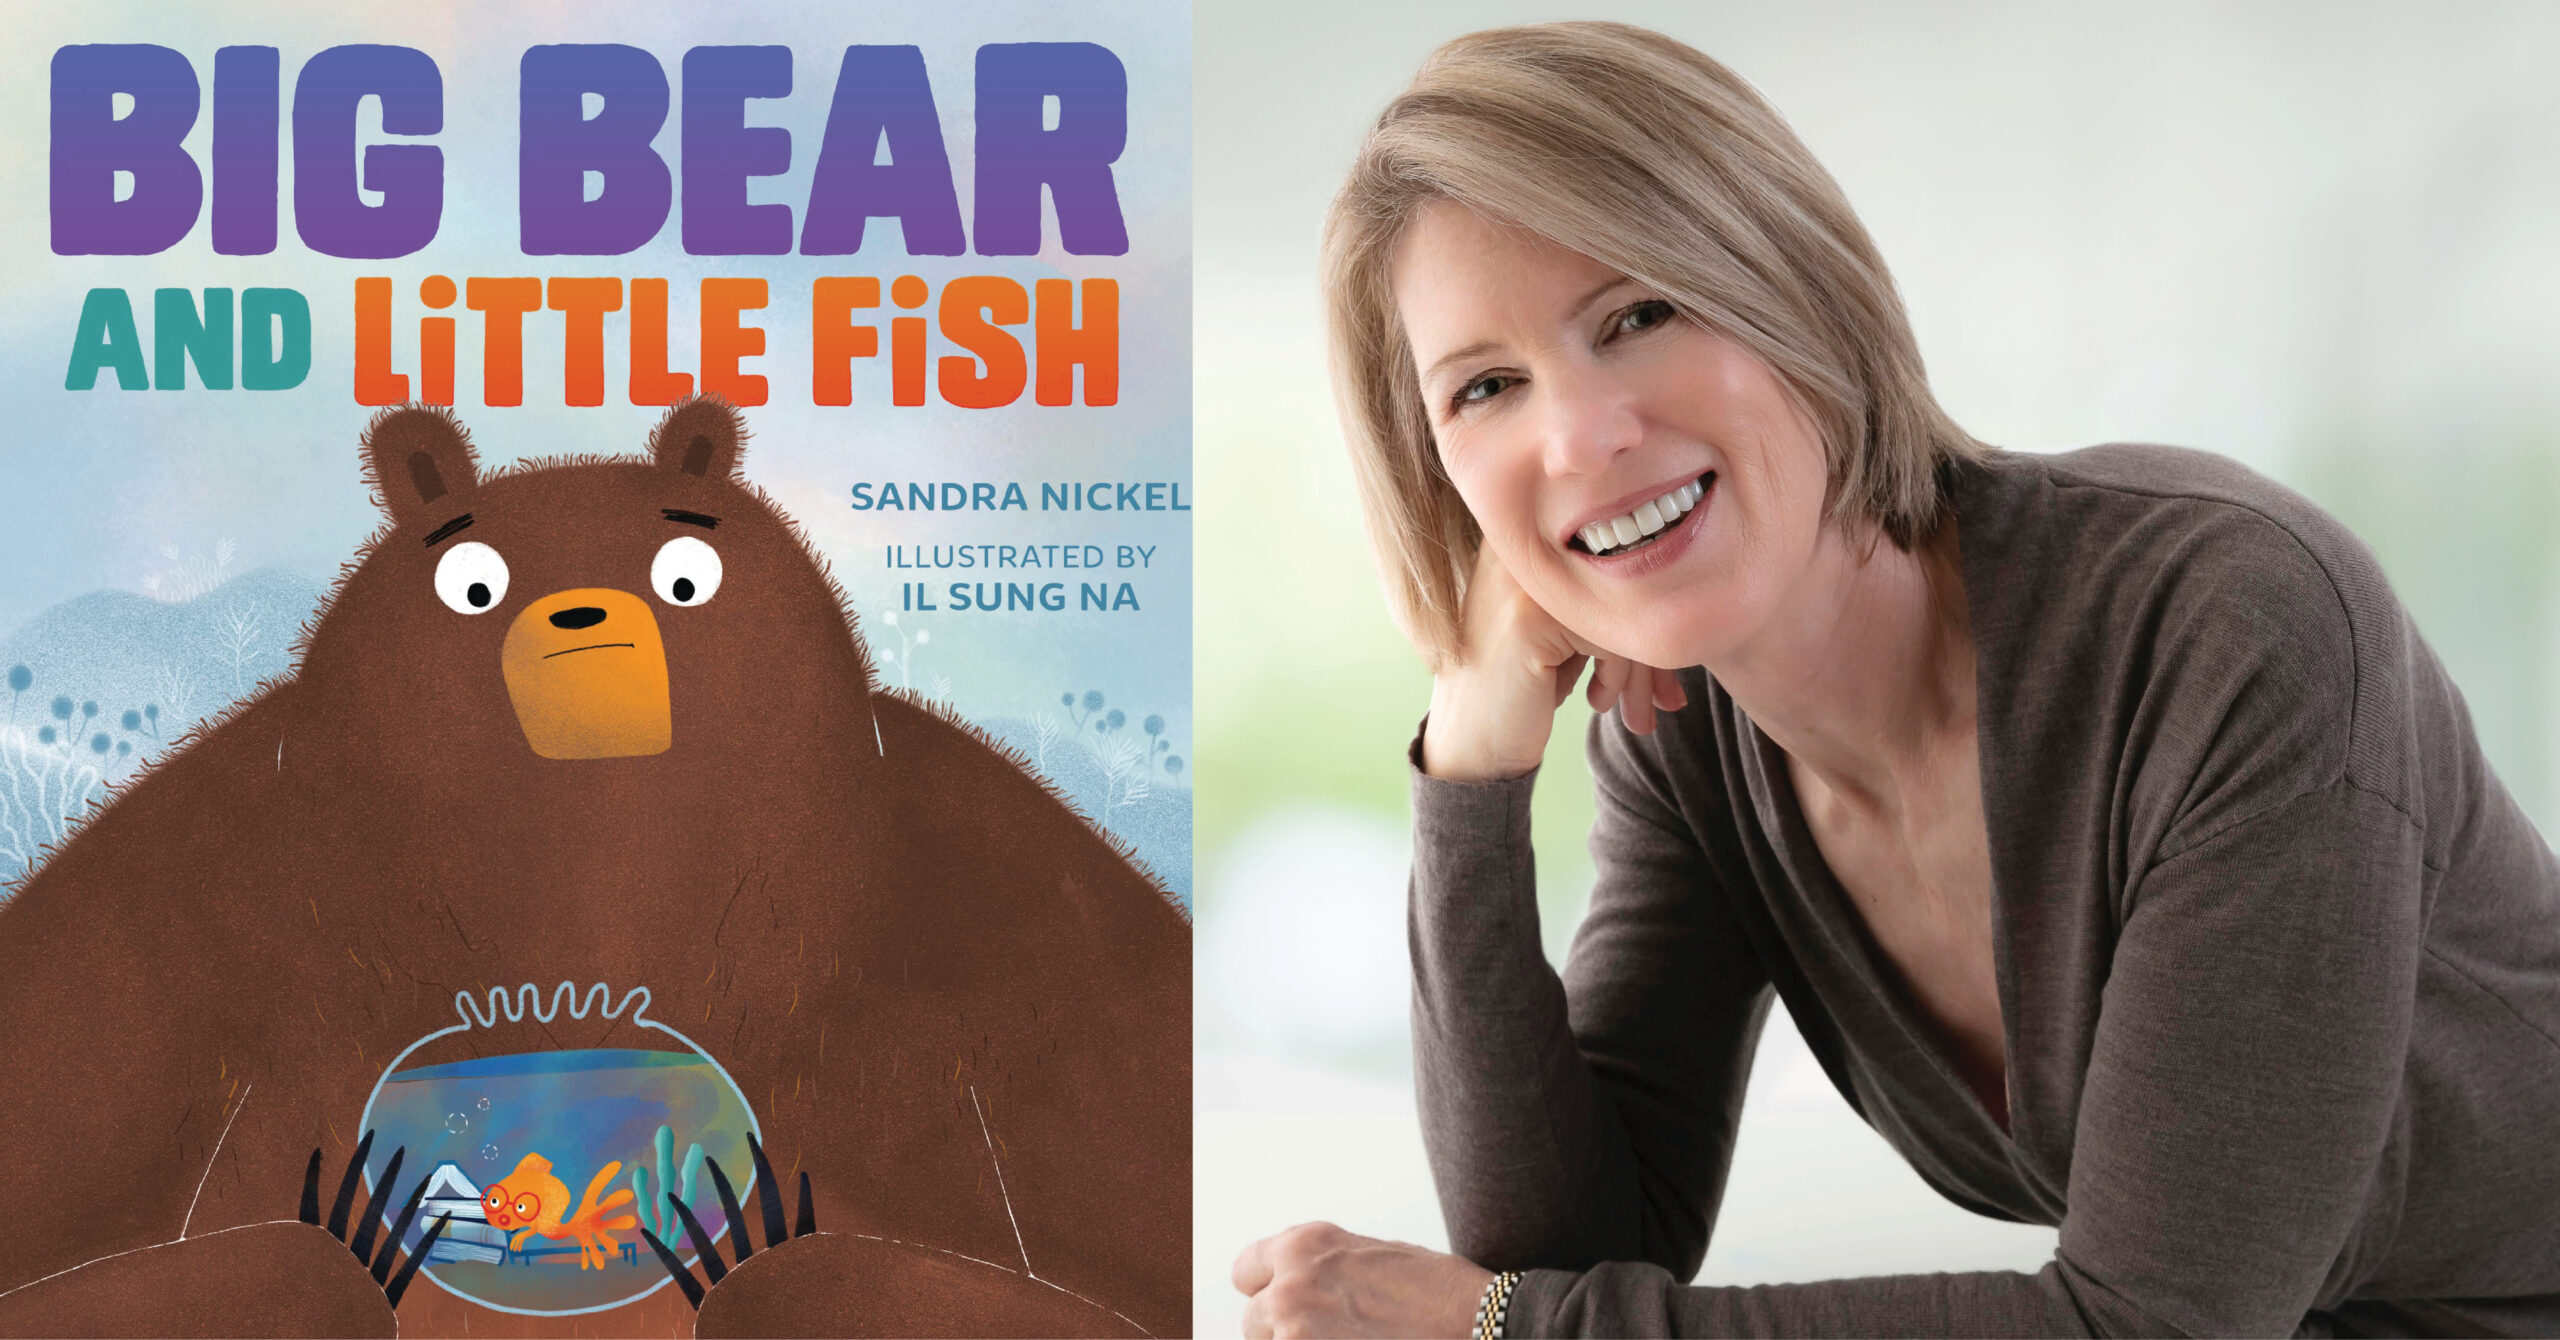 Image includes the cover of "Big Bear and Little Fish" on the left, and a portrait photo of Sandra Nickel on the right.